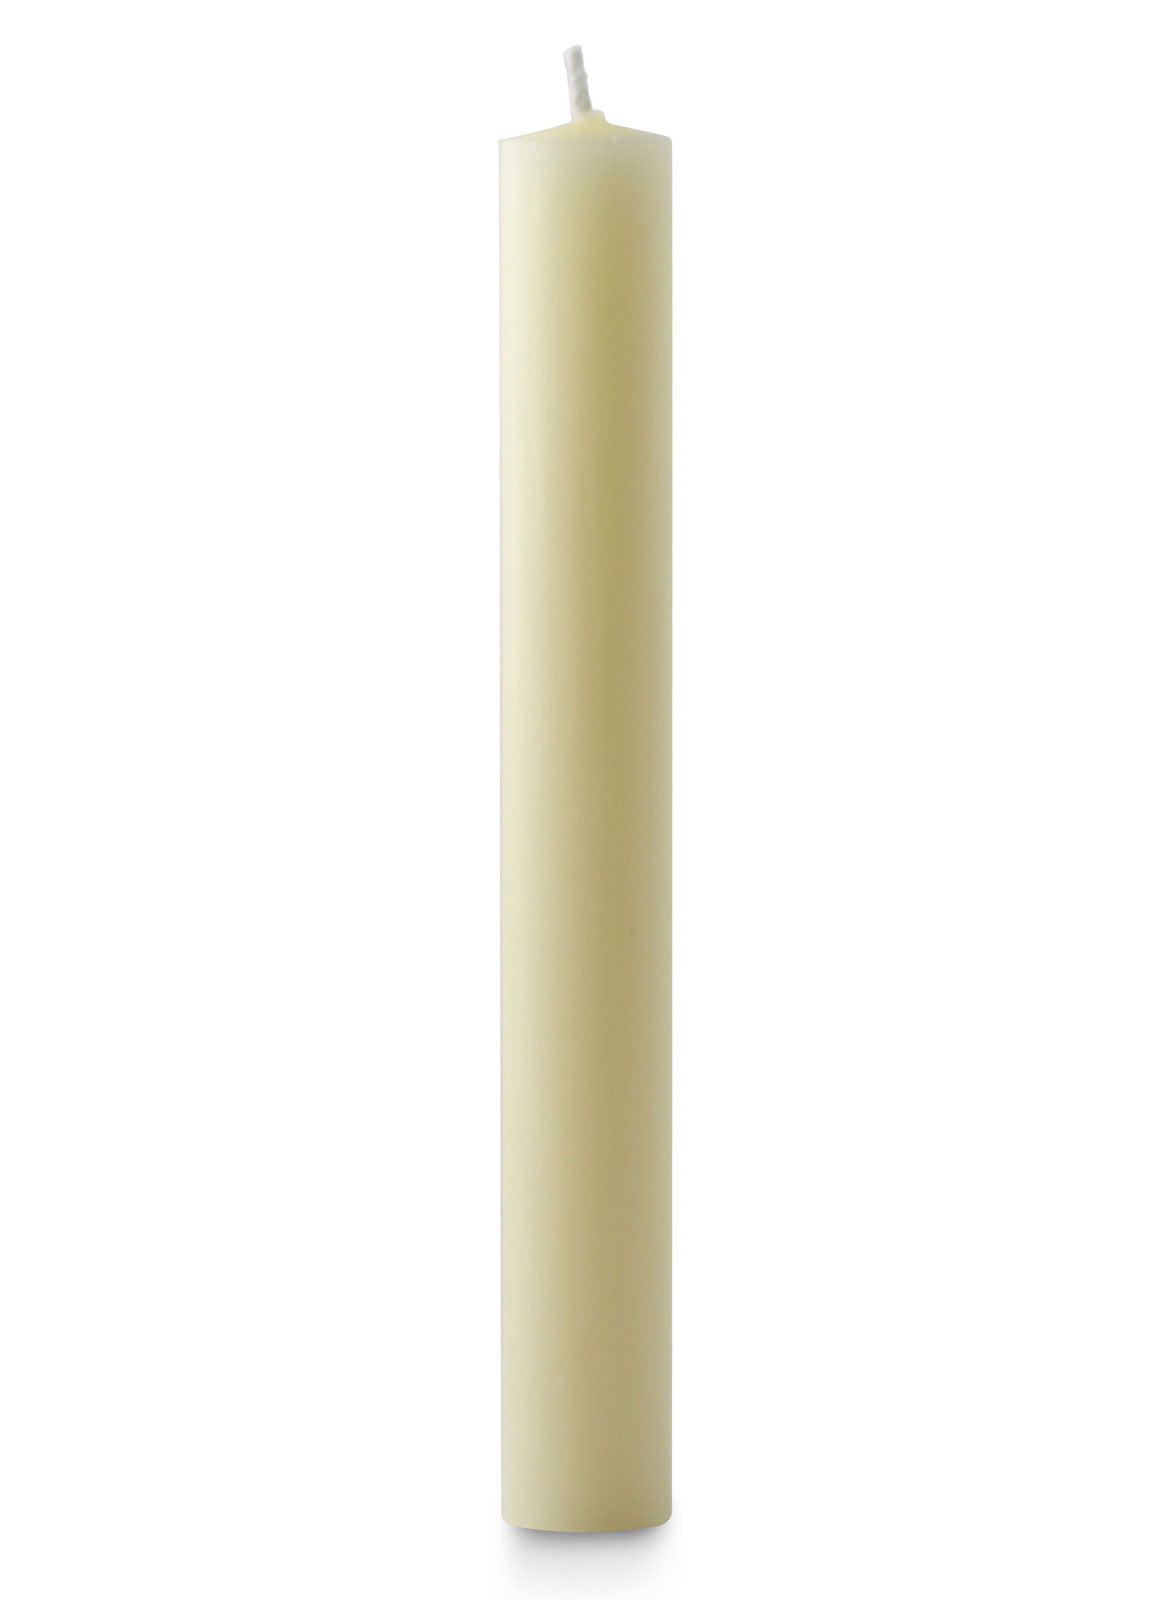 Image of Church Candles 6" x 1" - Pack of 48 other